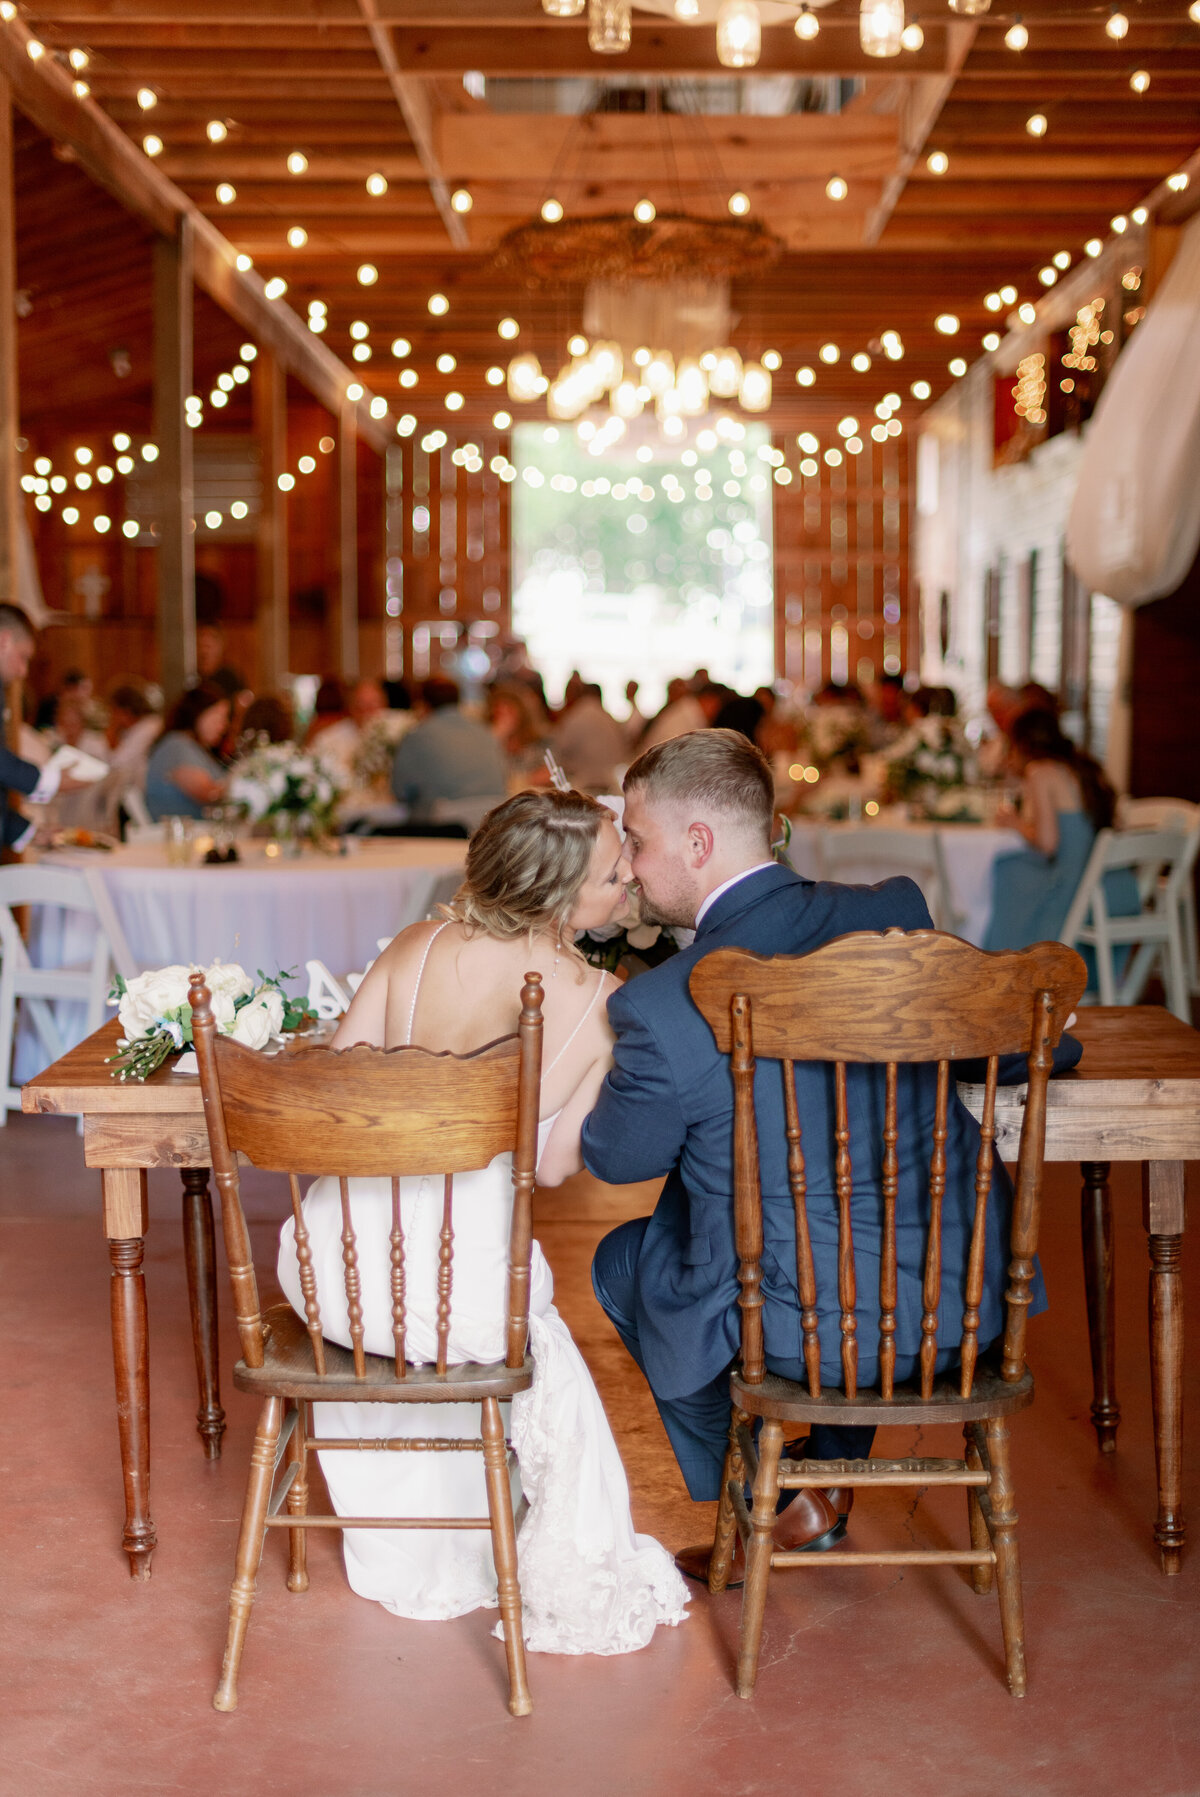 Wedding at Arran Farms photographed by best wedding photographers in Greenville South Carolina Kayla Nelson PHotography